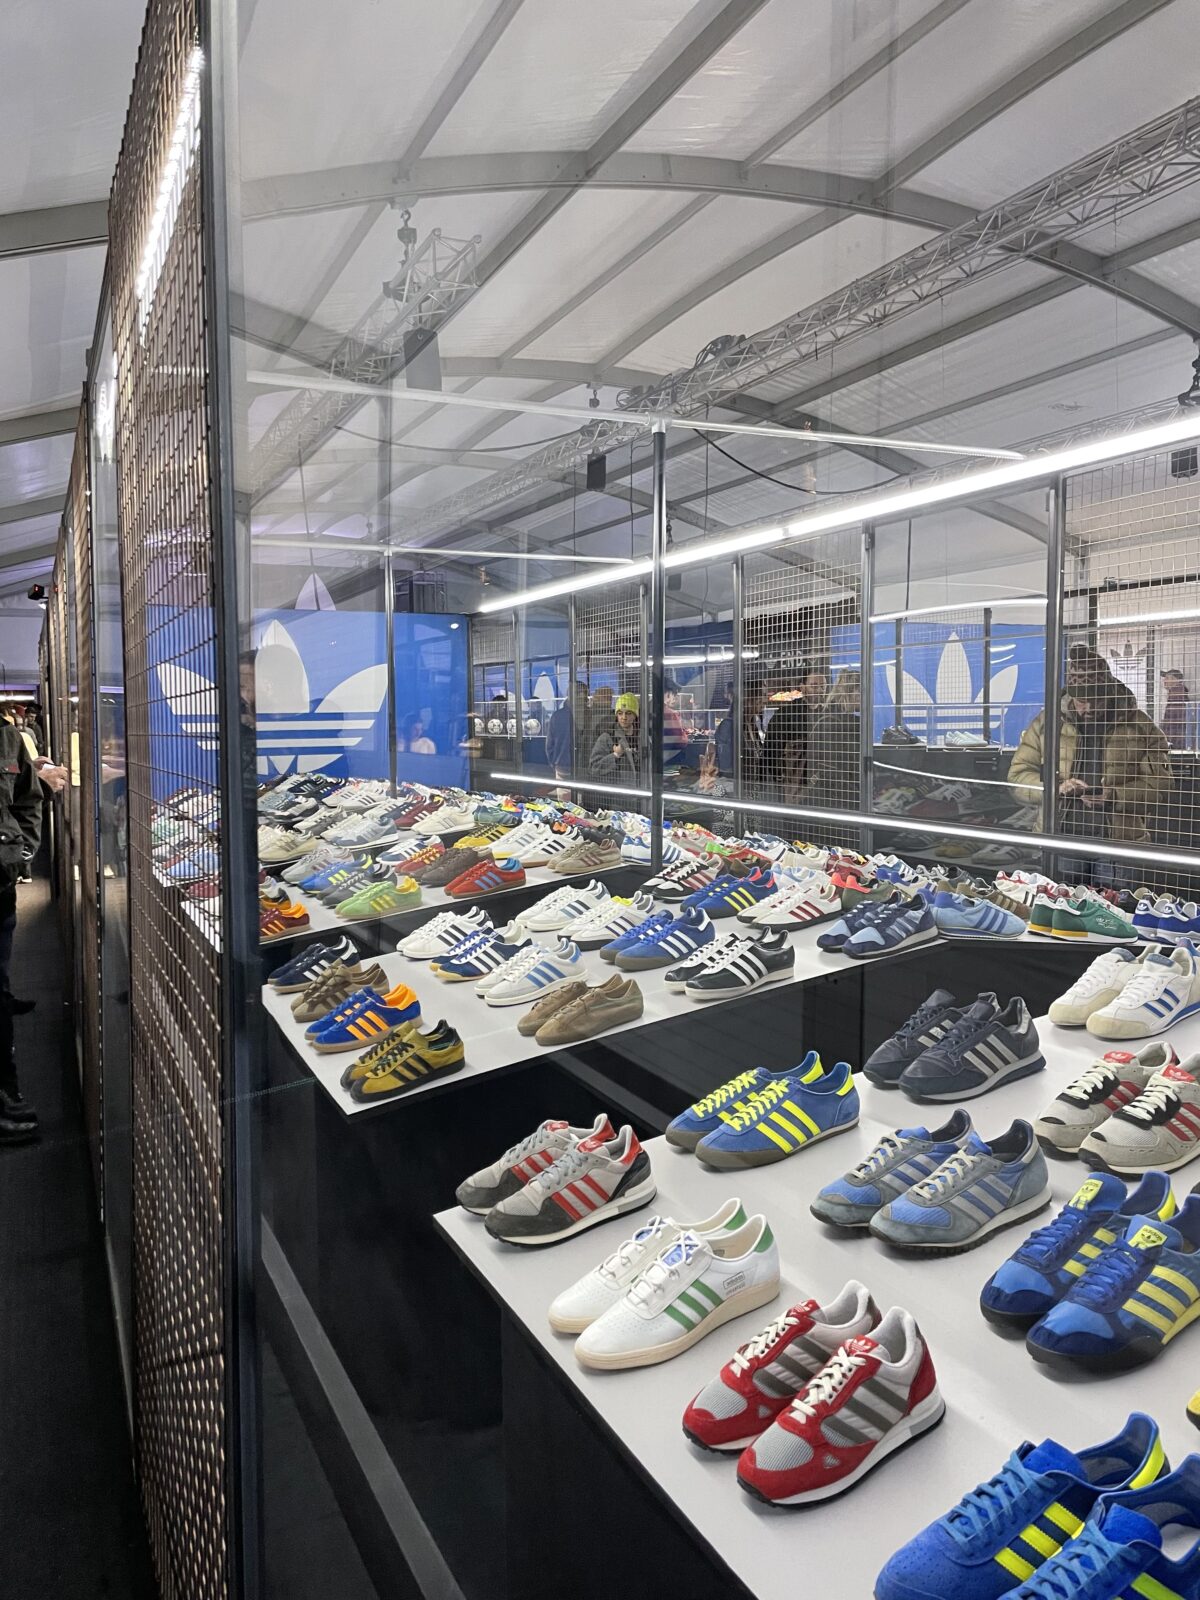 episodio Goma Melódico Exhibition featuring rare Adidas trainers has opened in Manchester